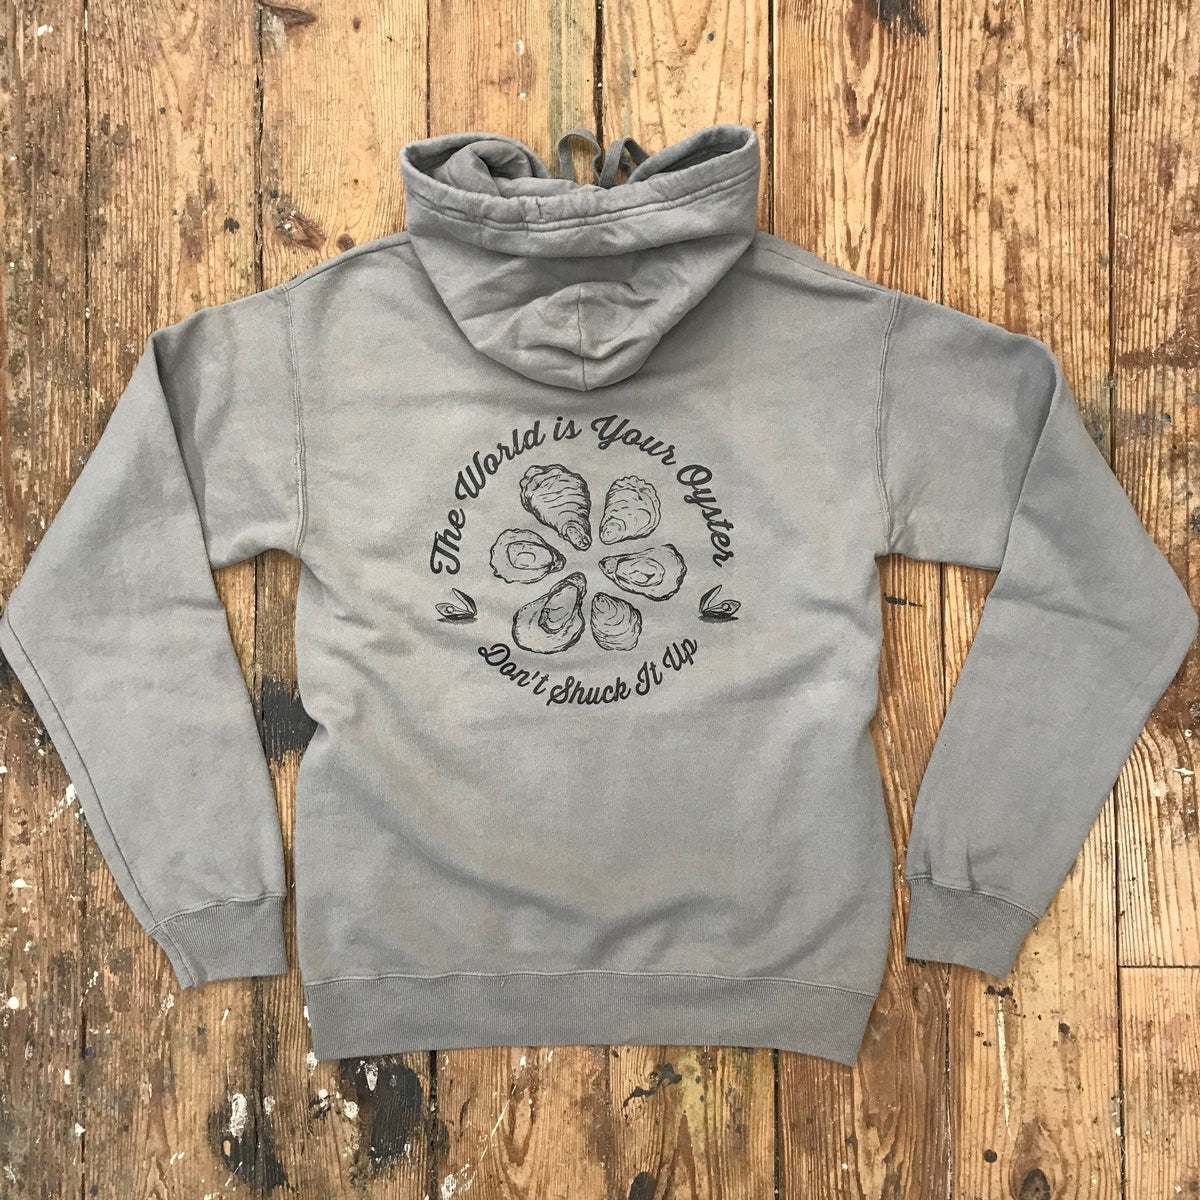 Warm Grey hoodie featuring the 'The World is Your Oyster, Don't Shuck it Up' design on the back in black ink.